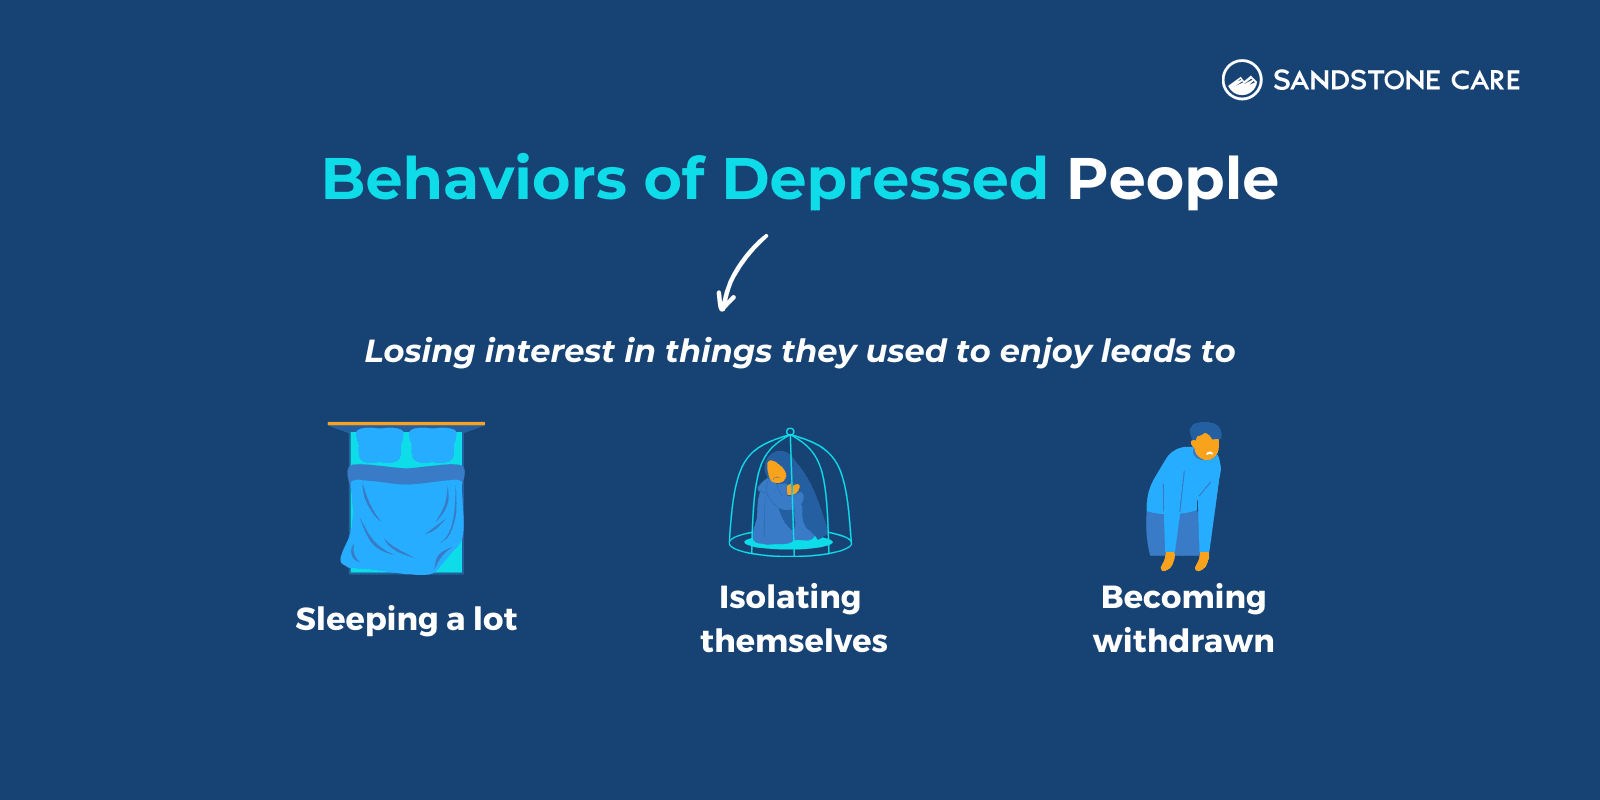 3 Behaviors of Depressed People represented with relevant graphics